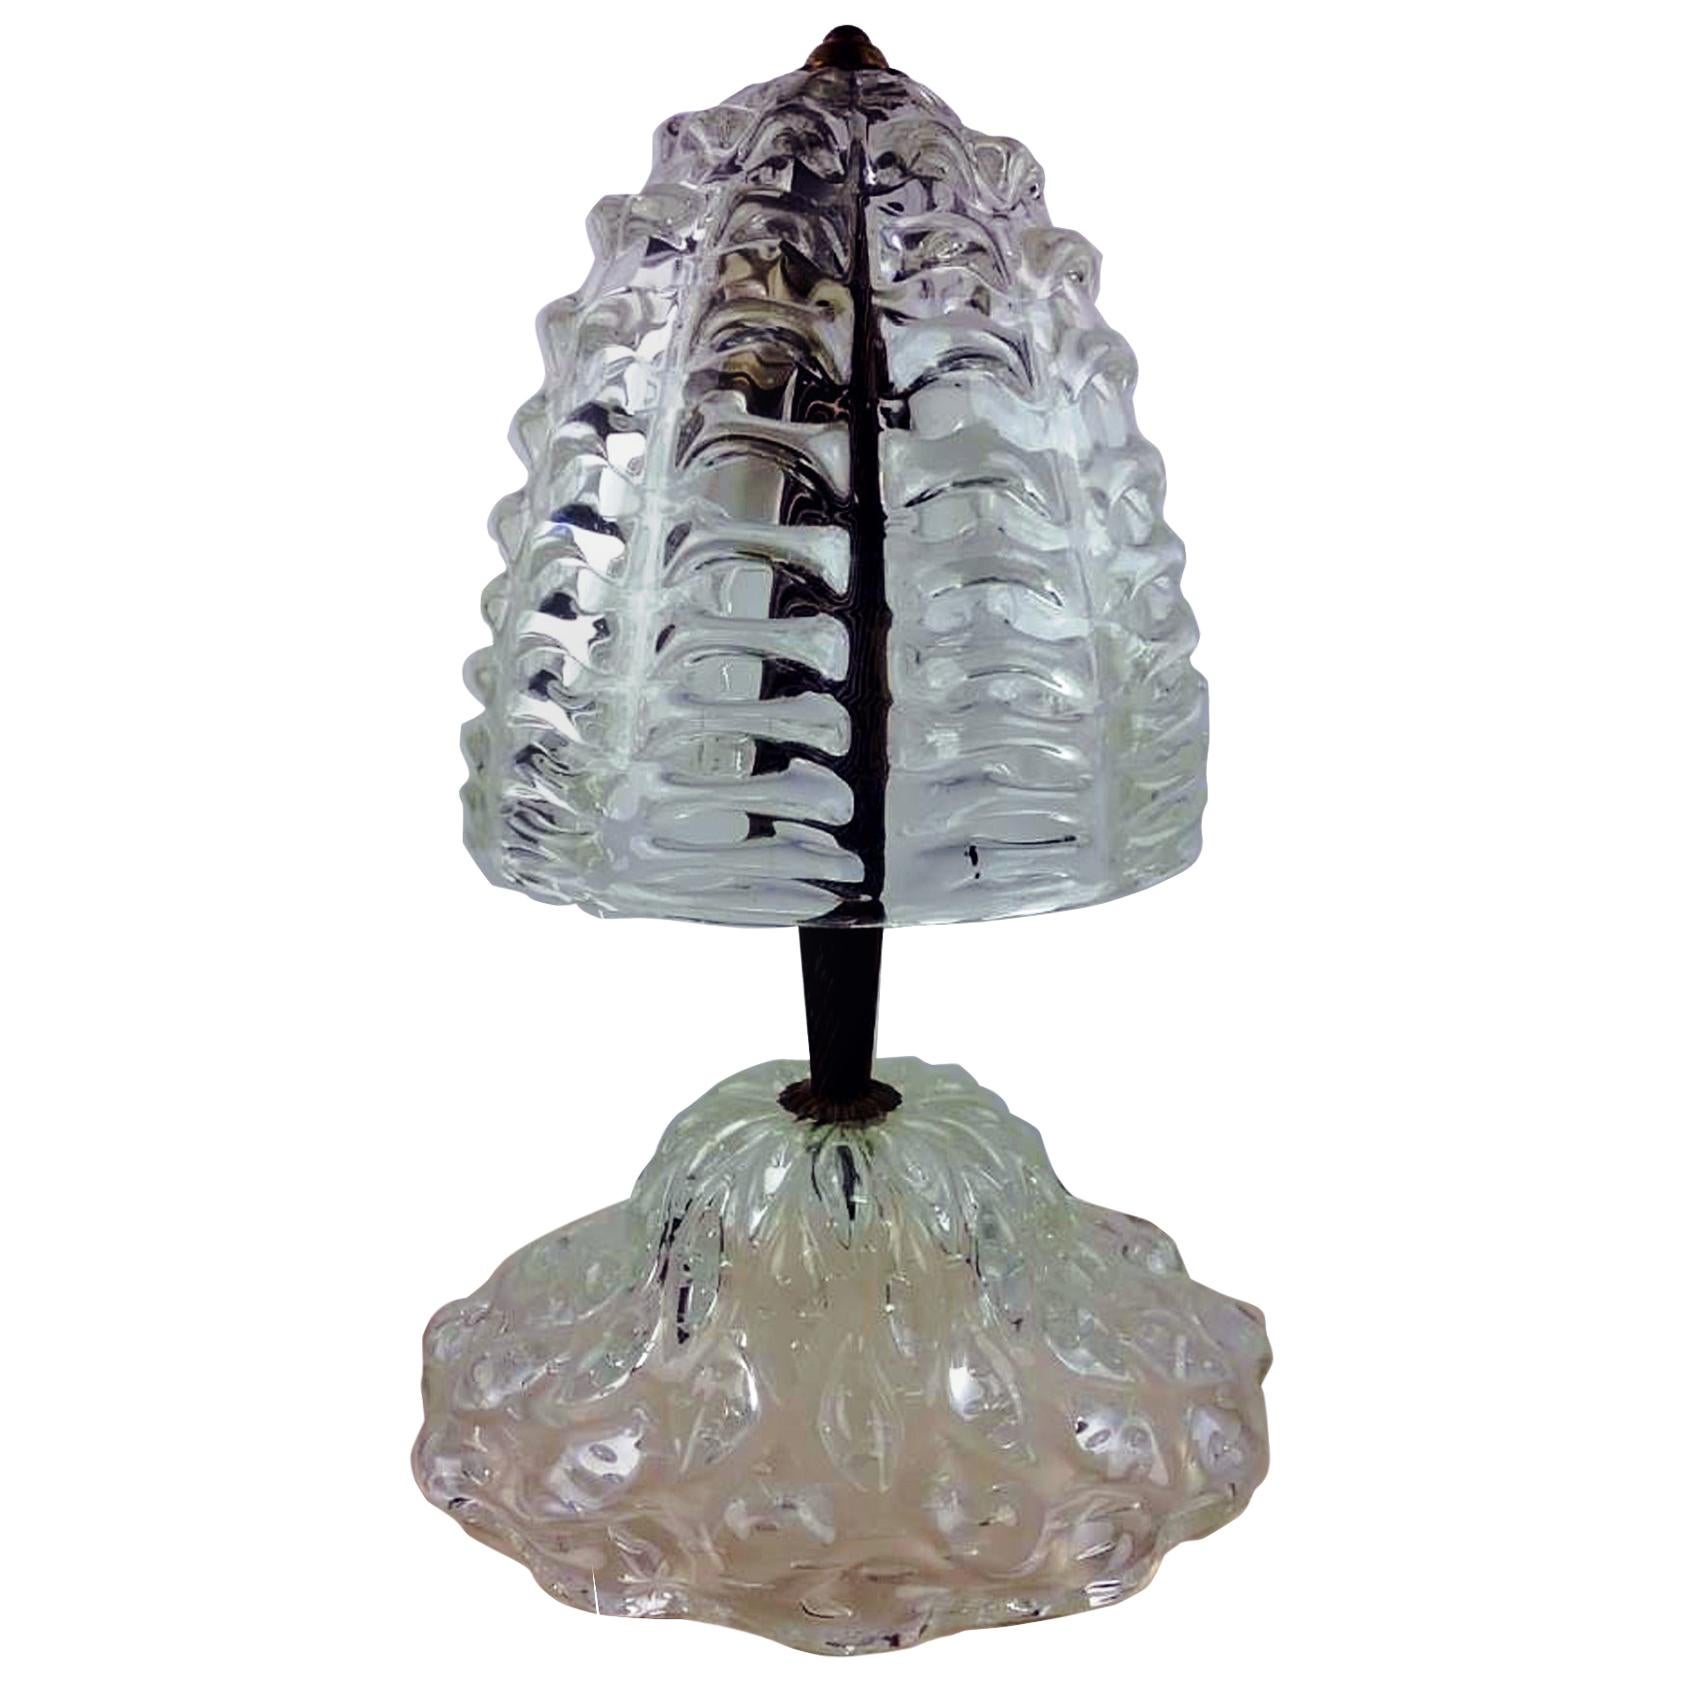 Barovier Murano Table Lamp, Italy, 1940s For Sale